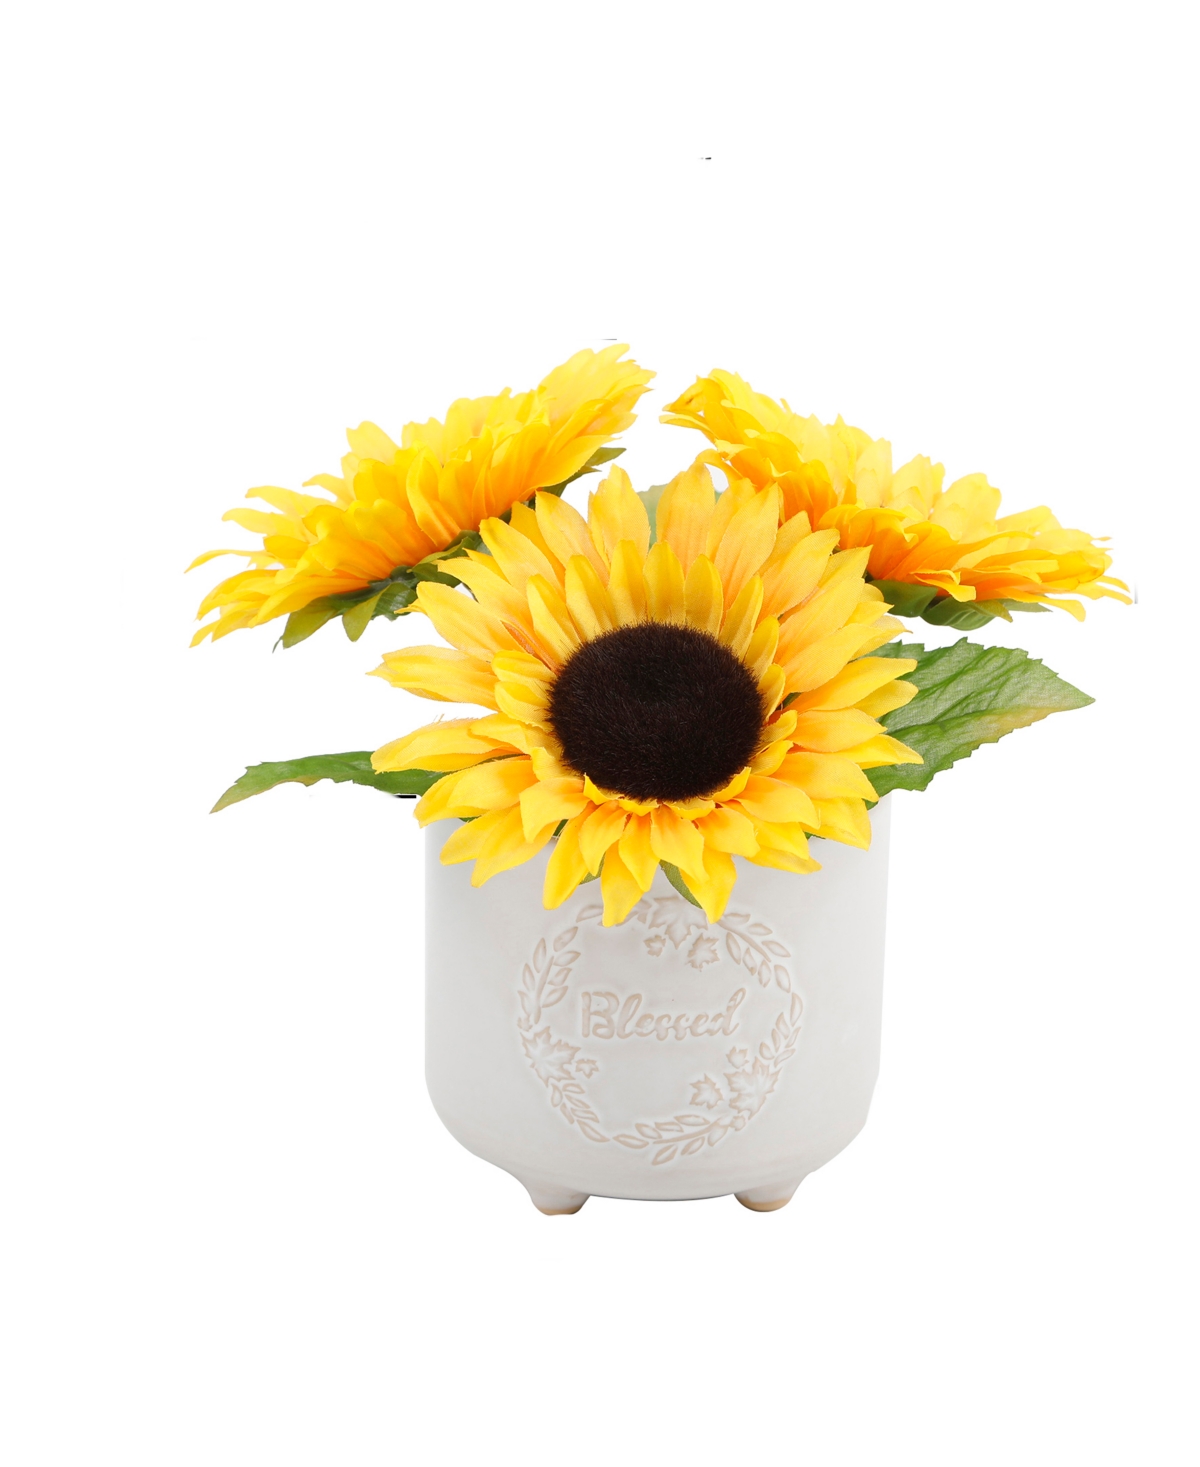 9.5" Artificial Sunflowers in Blessed Ceramic Footed Pot - Yellow, White